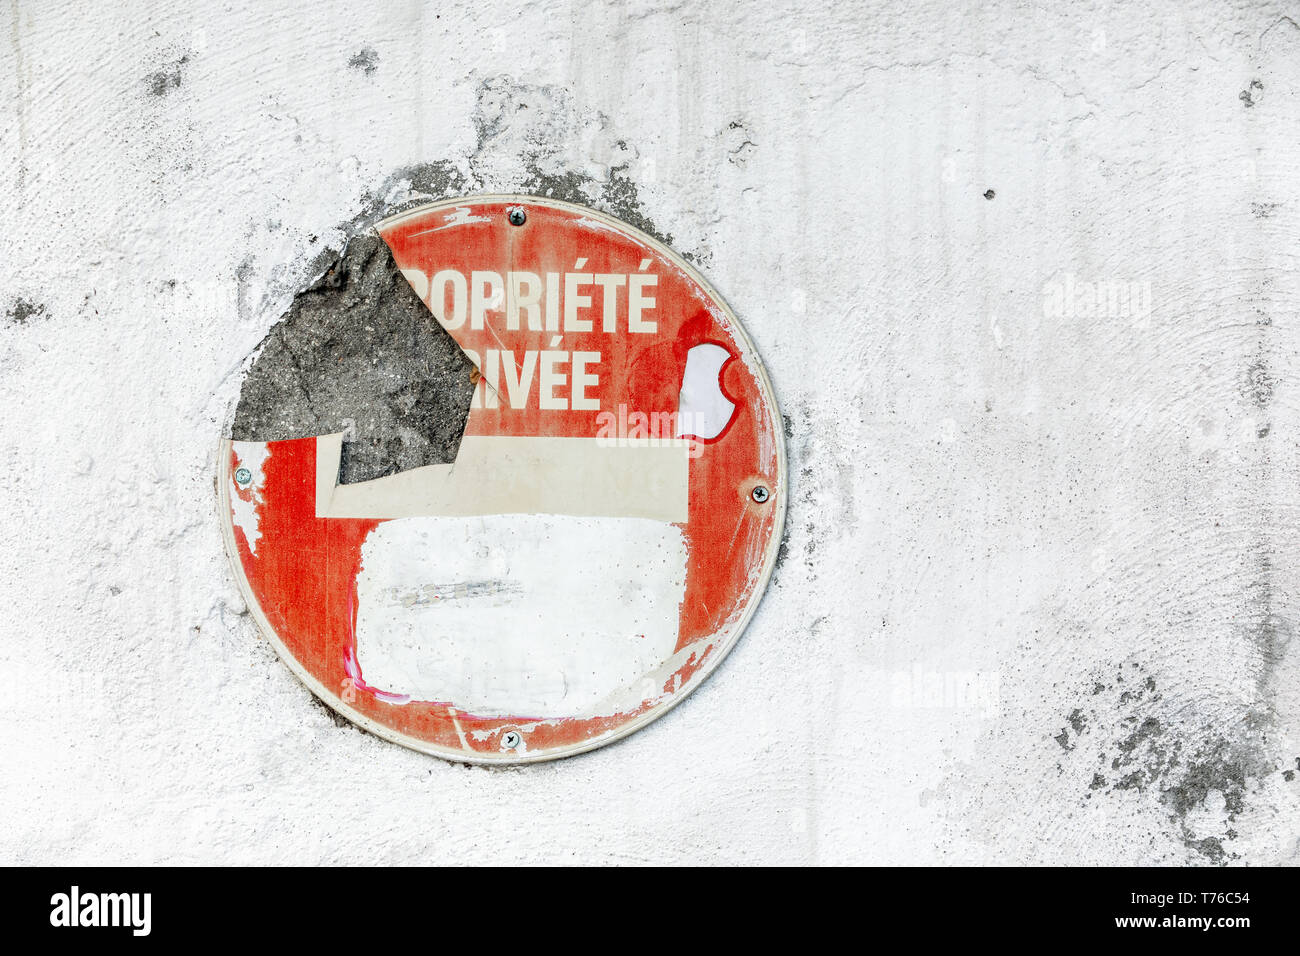 old traffic sign on the side of a building in Gustavia, St Barts Stock Photo